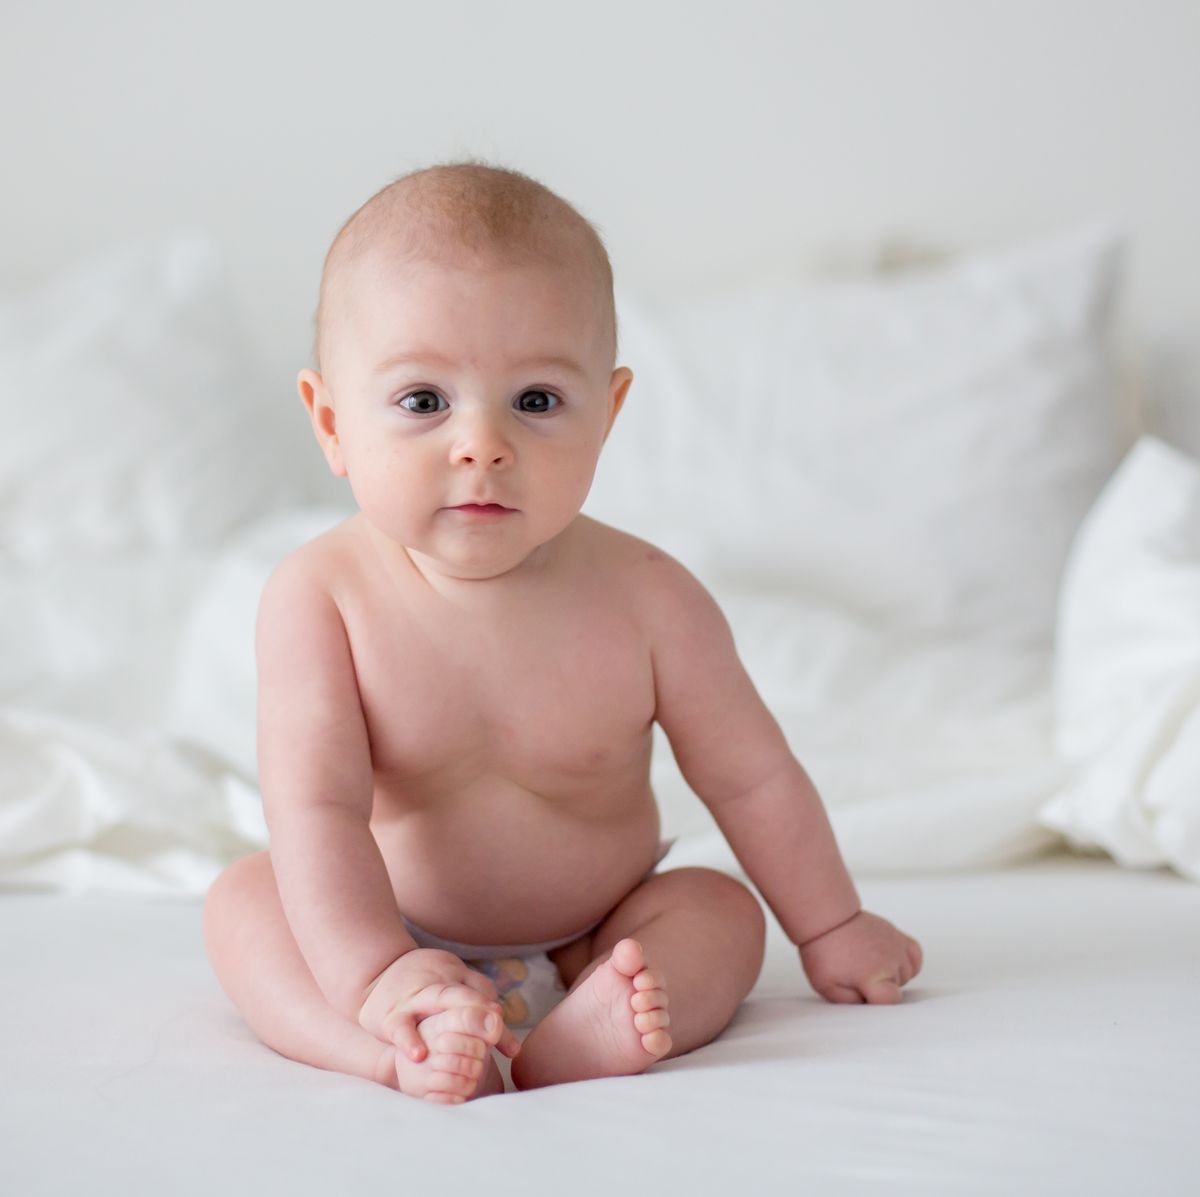 Cute little baby boy in diaper, smiling at camera in white bedroom, cute toddler sitting on bed, smiling